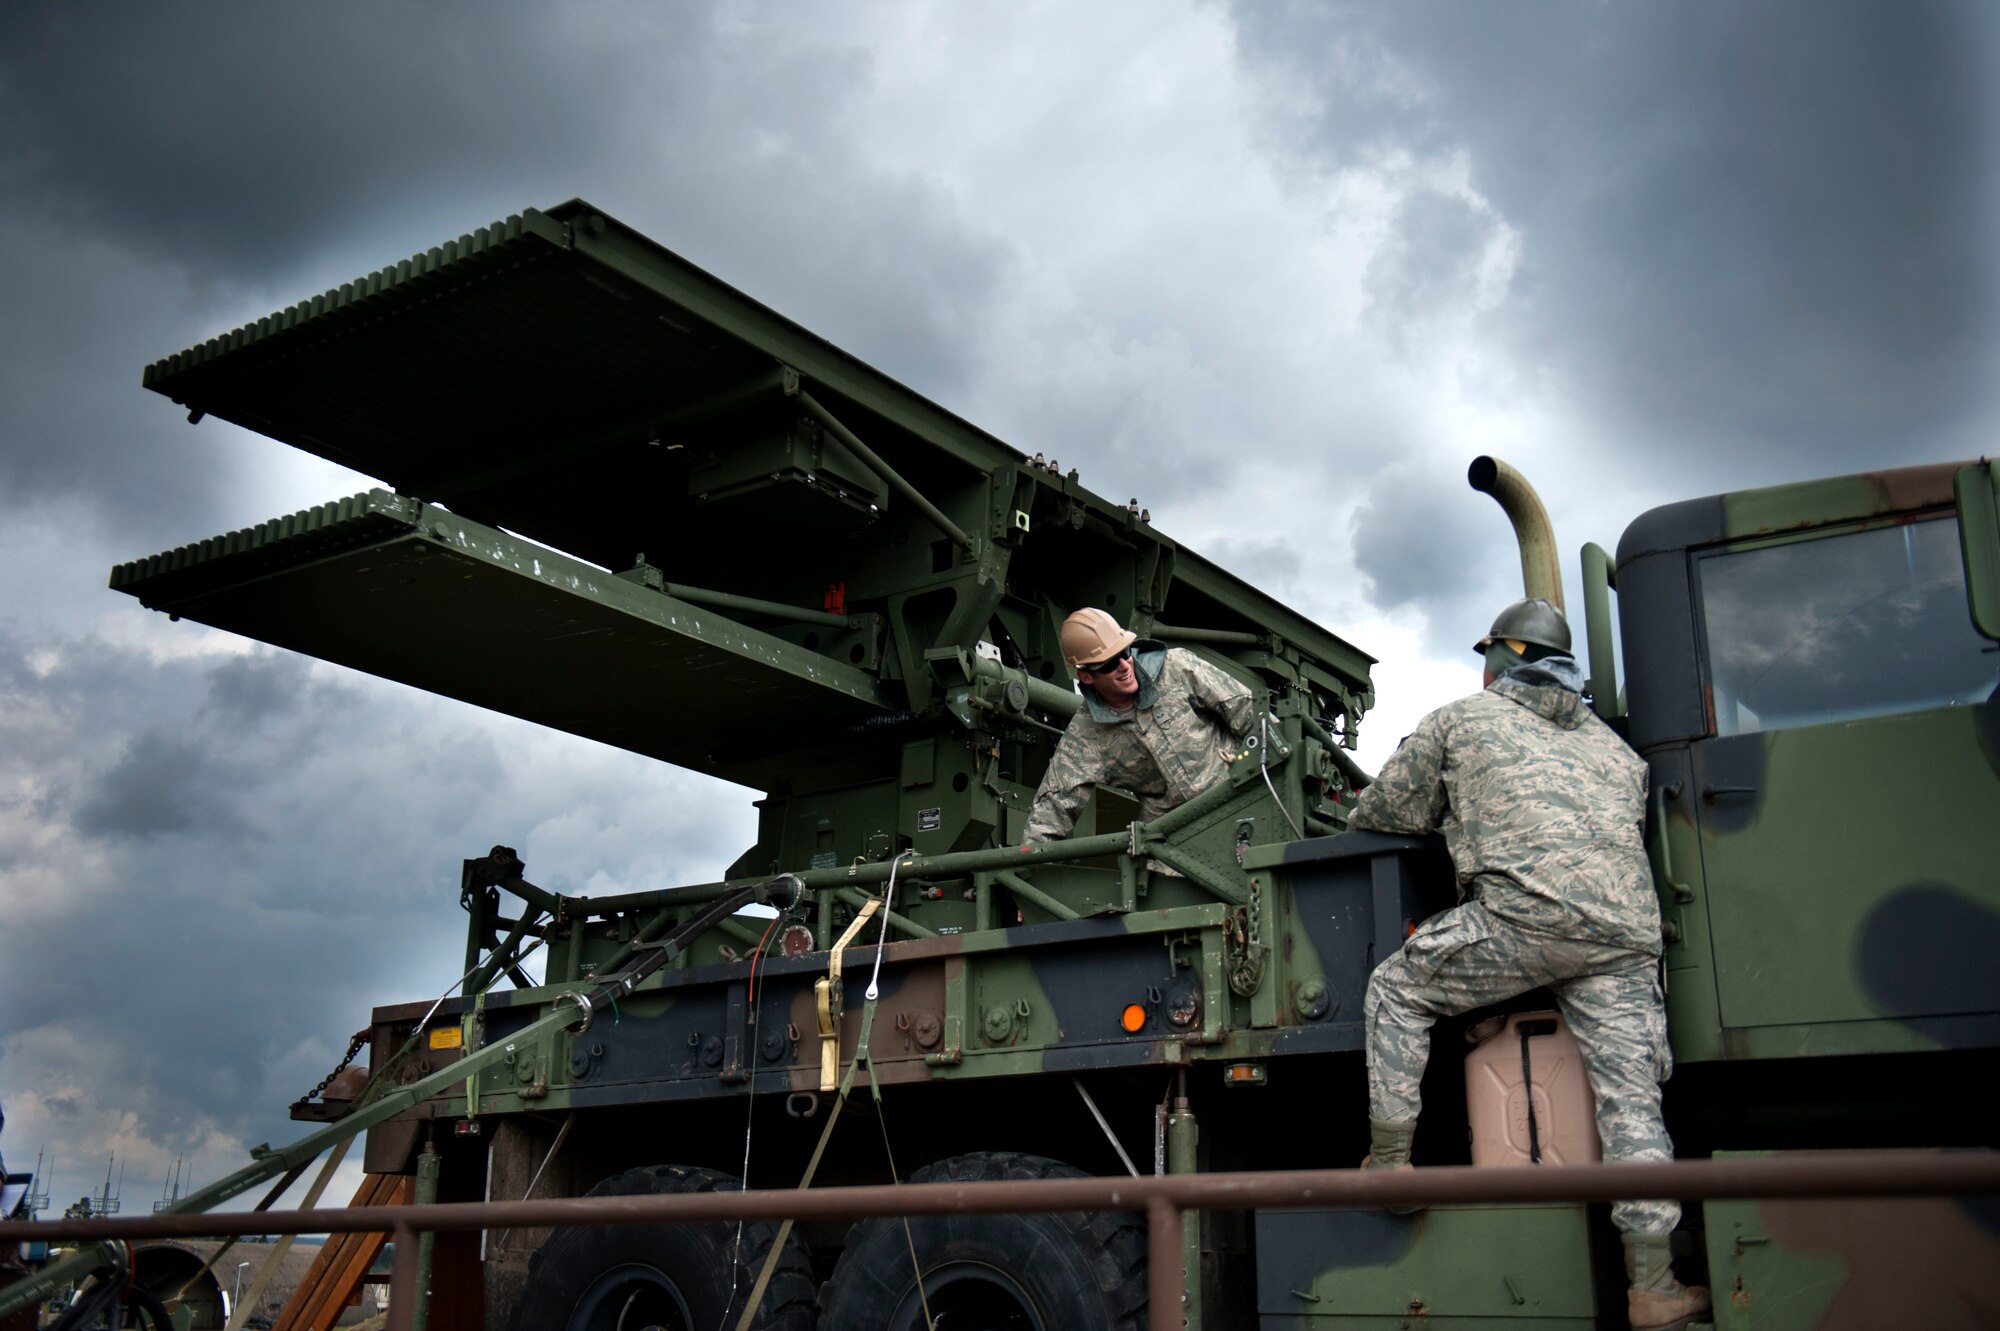 SPANGDAHLEM AIR BASE, Germany – U.S. Air Force Senior Airman Garret Adams, left, and Airman Ethan Wood, 606th Air Control Squadron ground radar systems technicians operate an AN/TPS-75 transportable aerospace control and warning radar Sept. 12 here, during a visit from the Bulgarian air force.  The tour serves as a way for the United States and Bulgaria to learn and exchange ideas about each other’s air force to ensure air dominance in any contingency operation. (U.S. Air Force photo by Airman 1st Class Gustavo Castillo/Released)